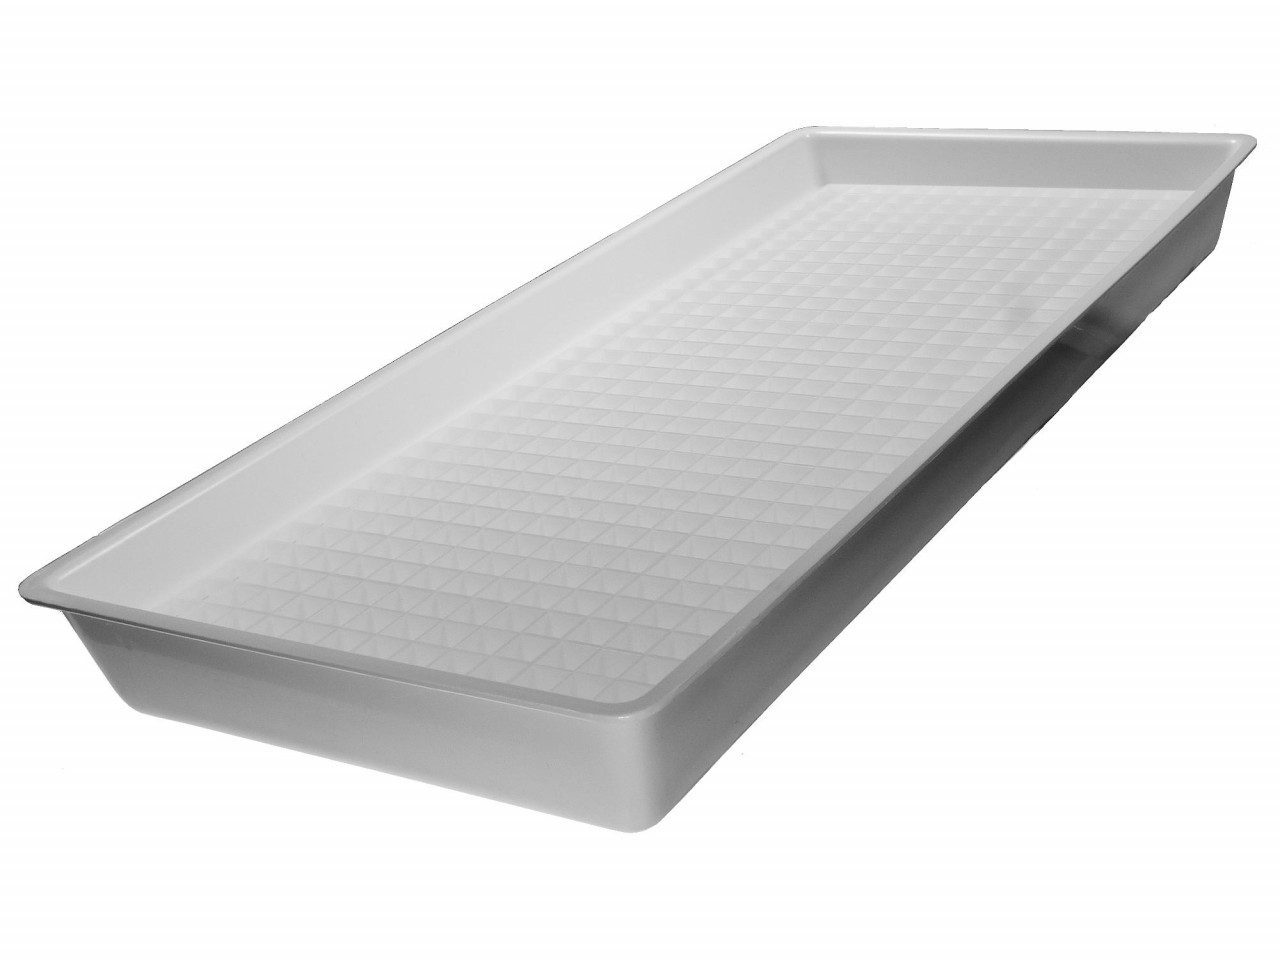 humidity tray small, white, complete